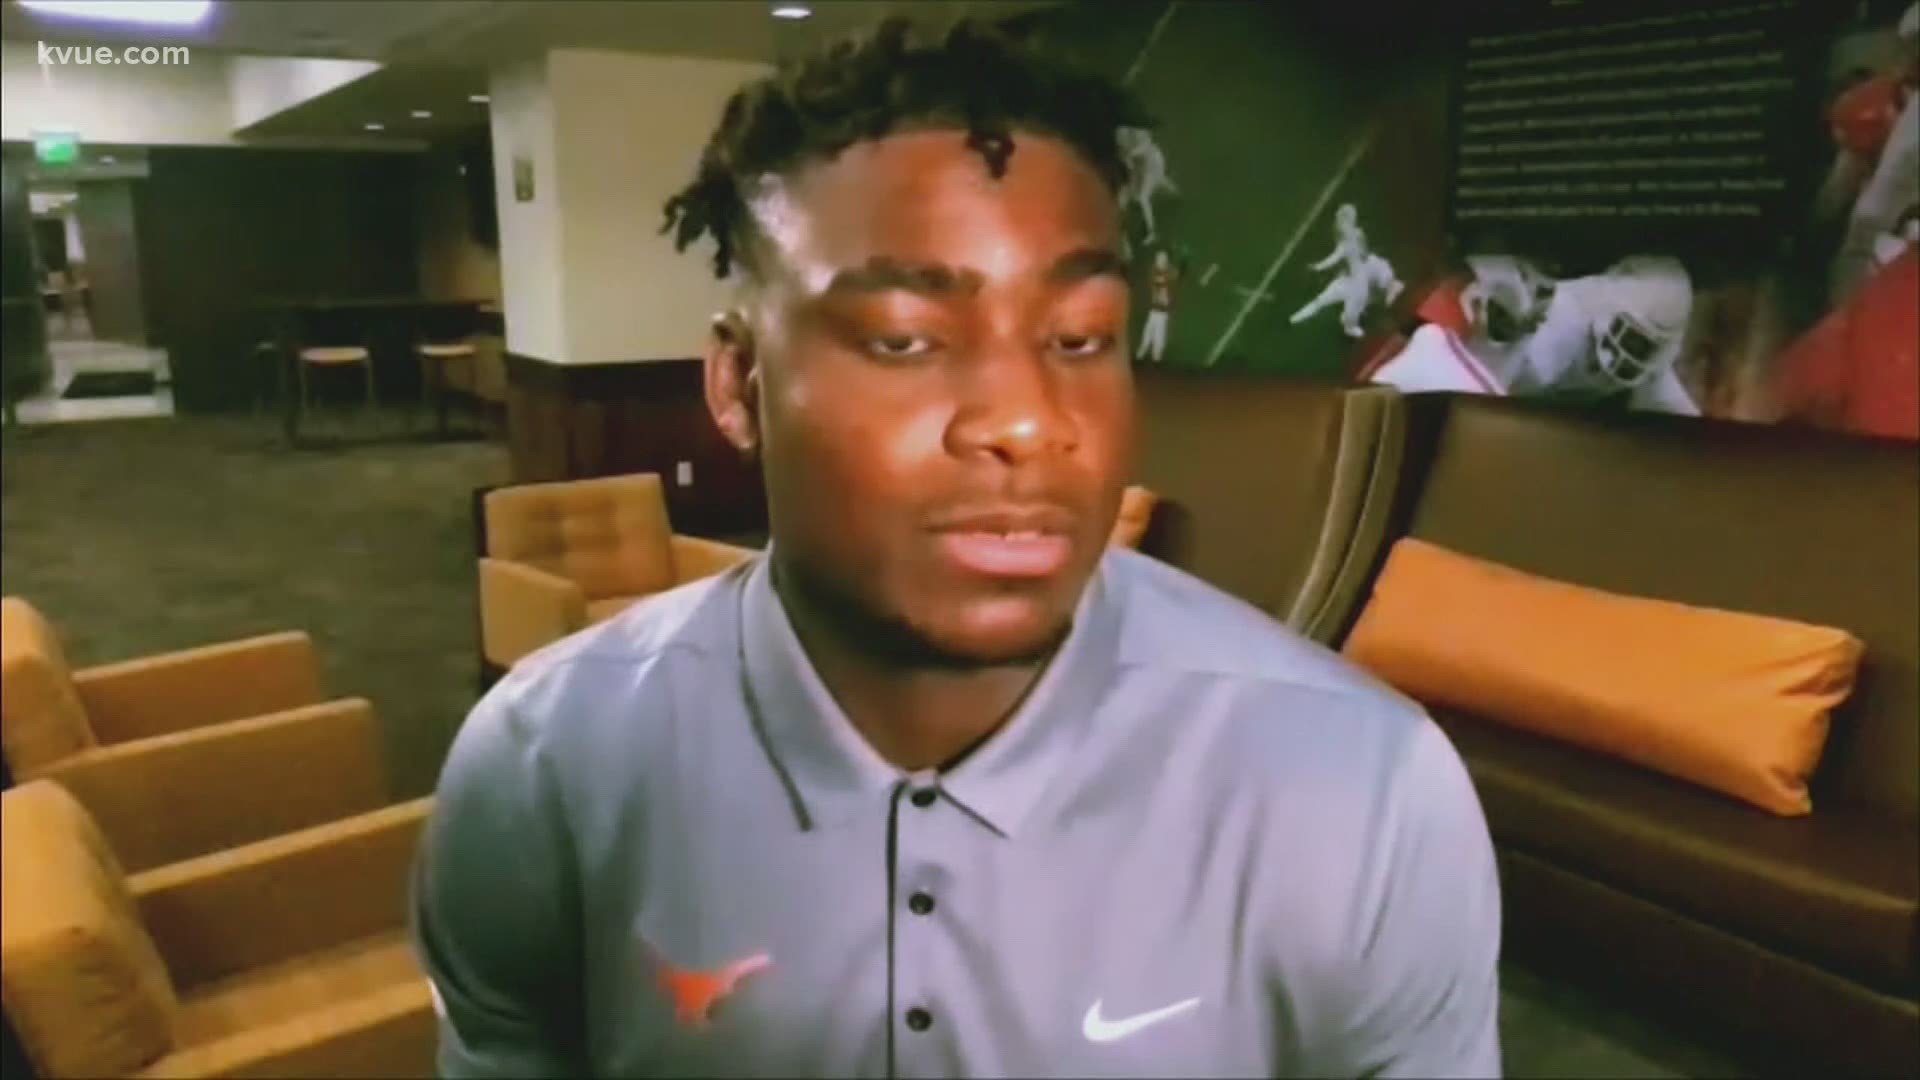 Student-athletes around the nation have banded together to fight racial injustice, and a handful of Texas Longhorns have been at the forefront of that movement.